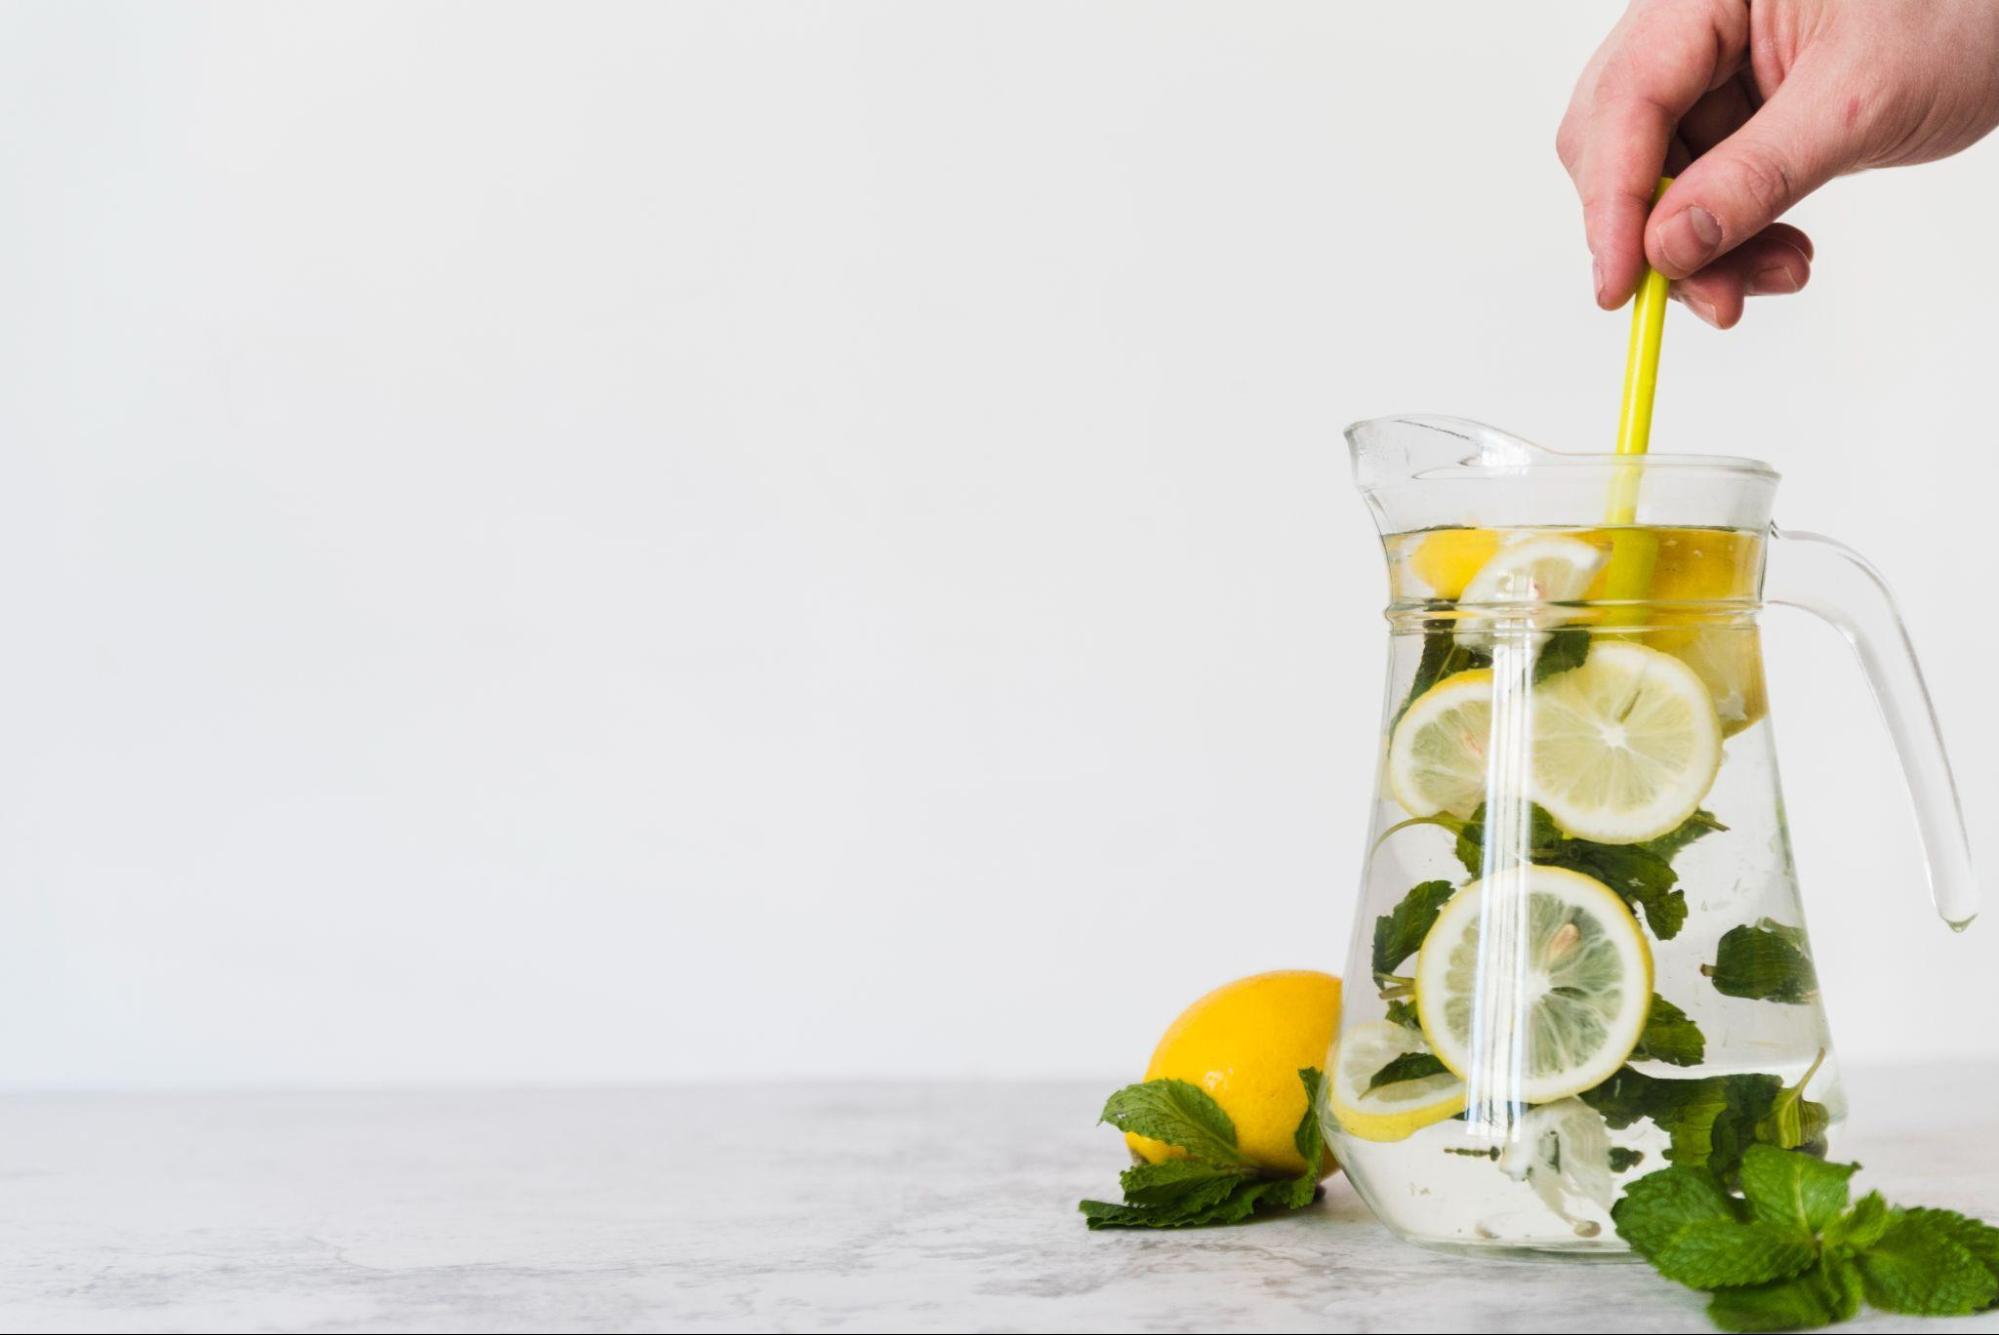 Does Drinking Lemon Water Really Aid Weight Loss? Here Are the Facts